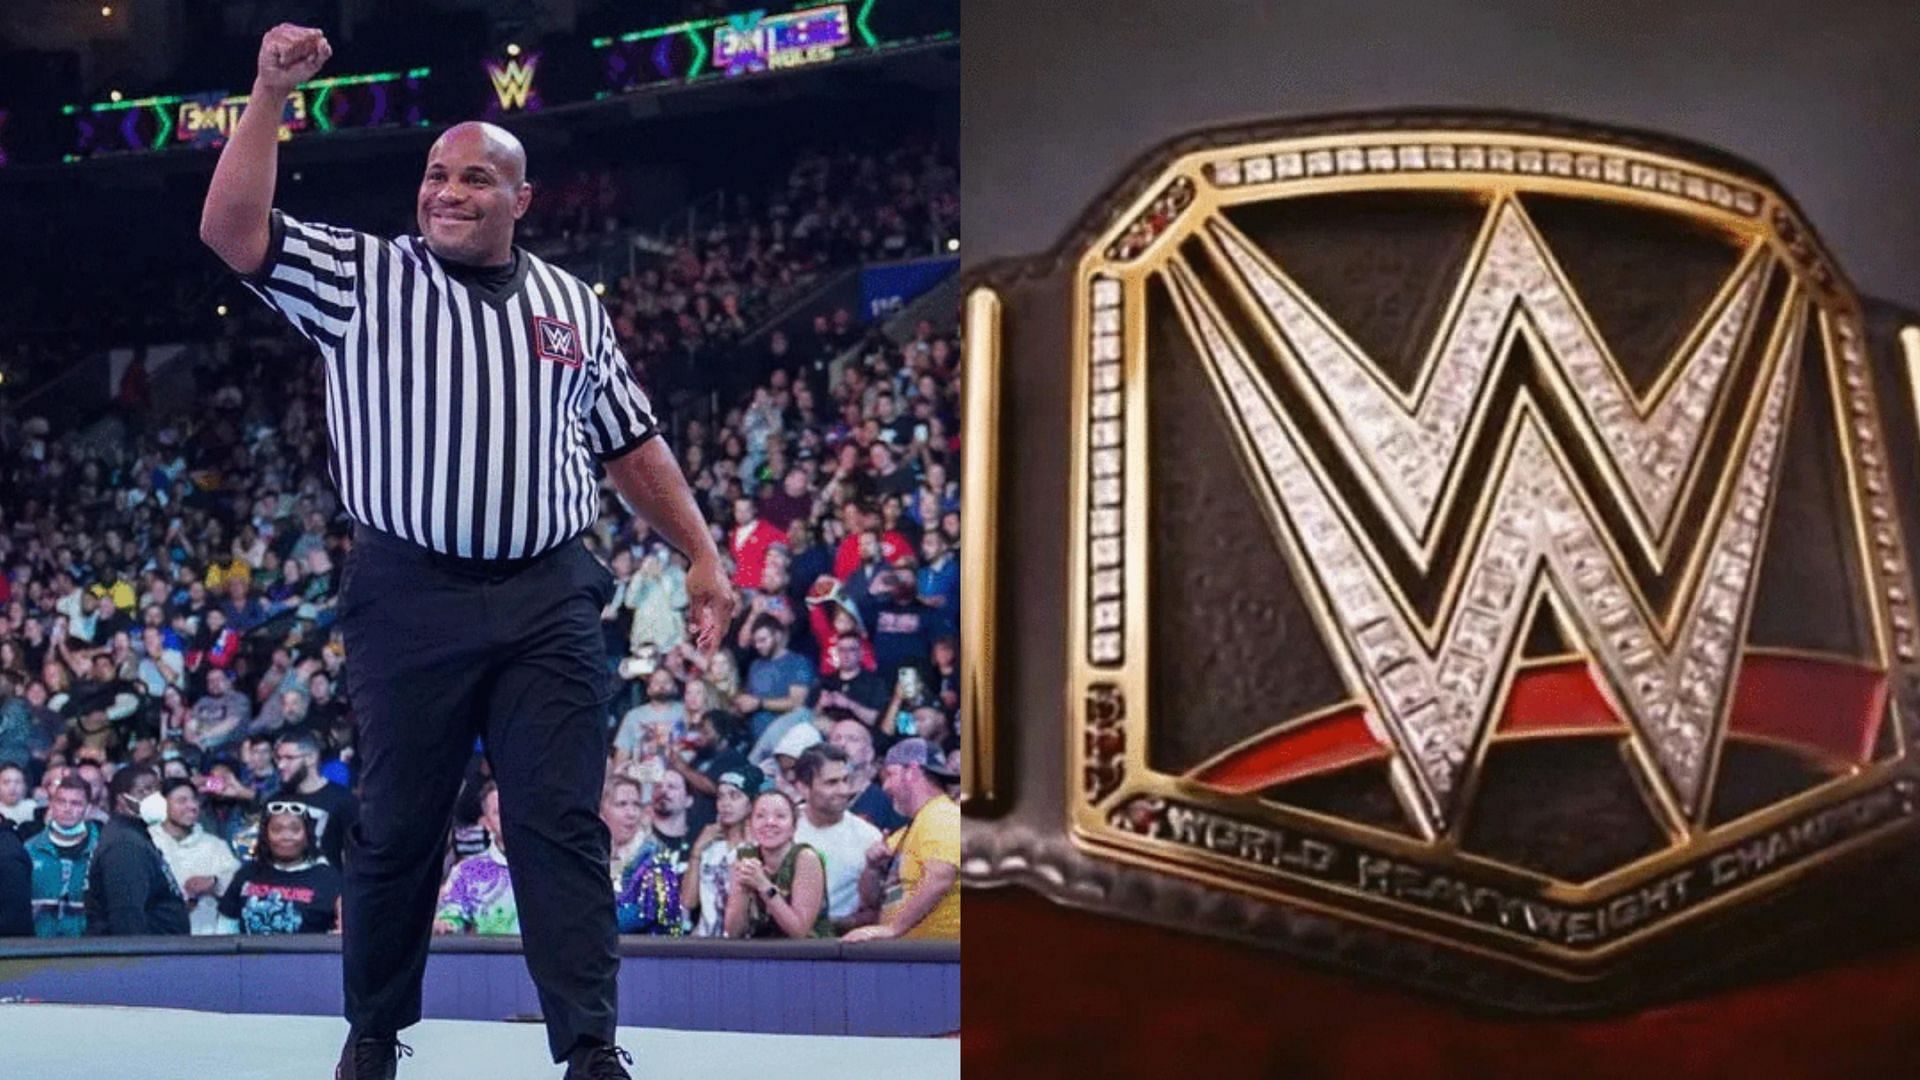 Daniel Cormier recently made an appearance on WWE TV.